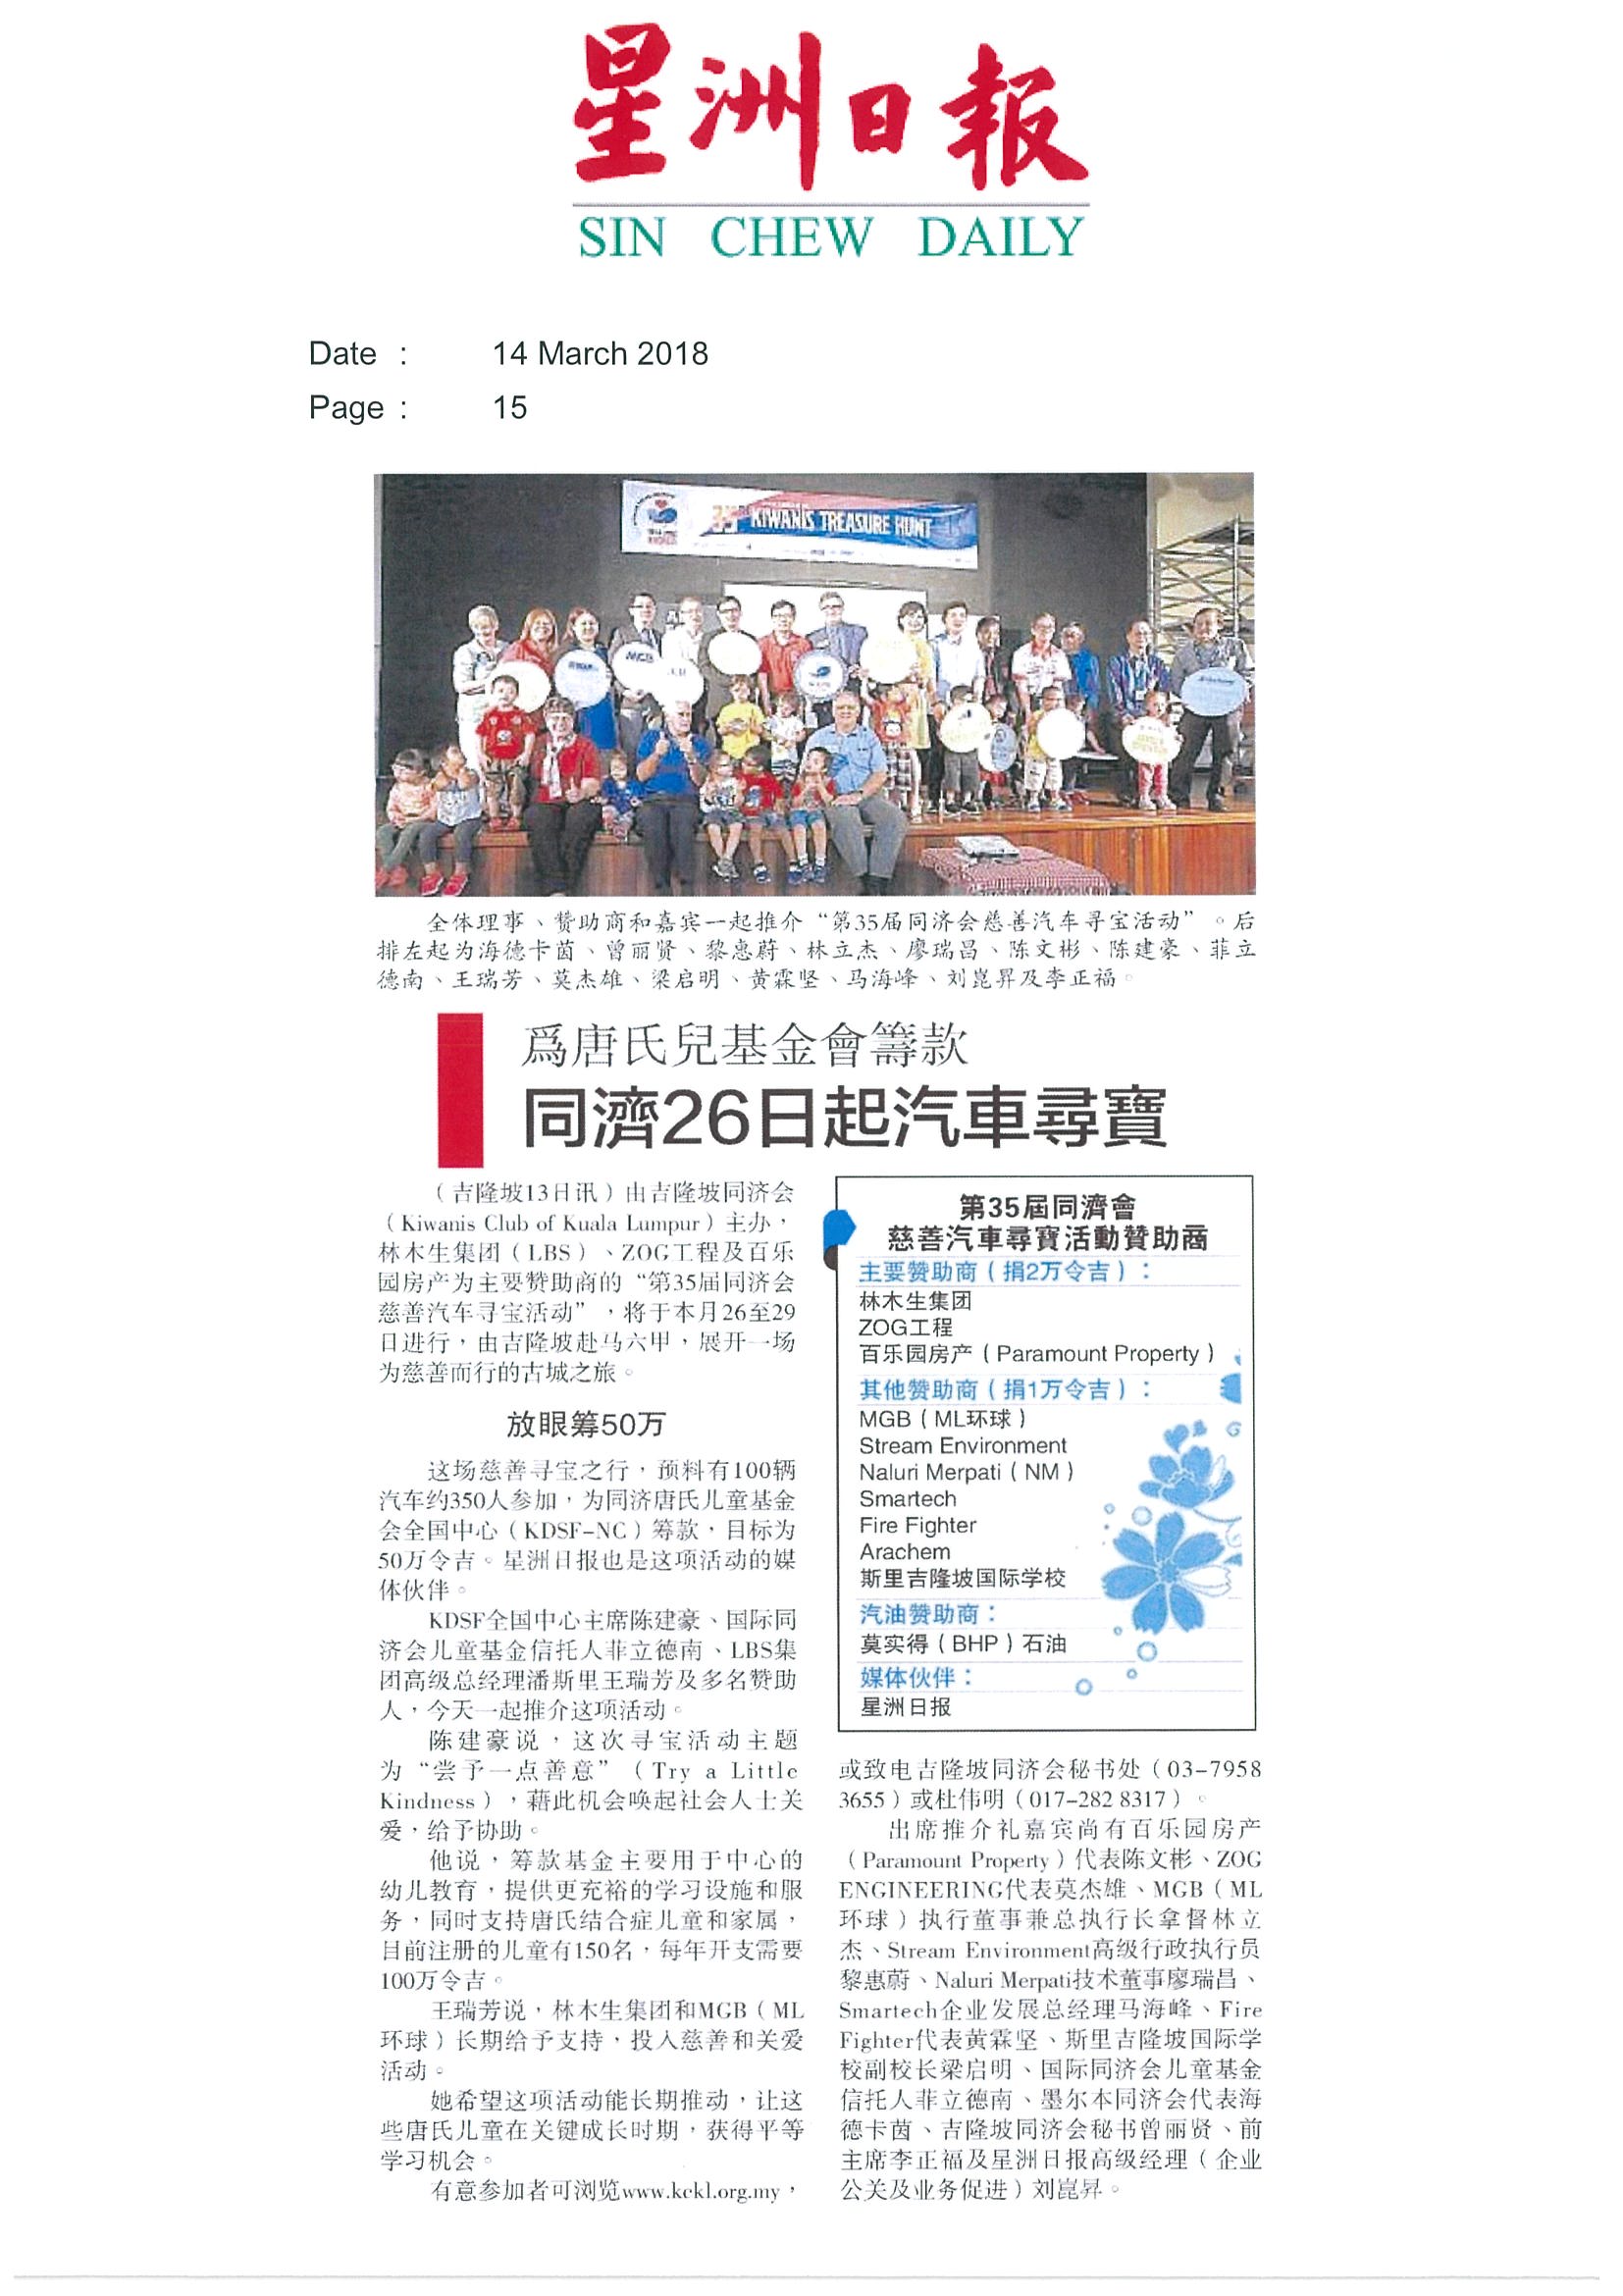 2018.03.14 Sin Chew – Raise fund for Down Syndrome Foundation, Kiwanis Treasure Hunt start on 26th